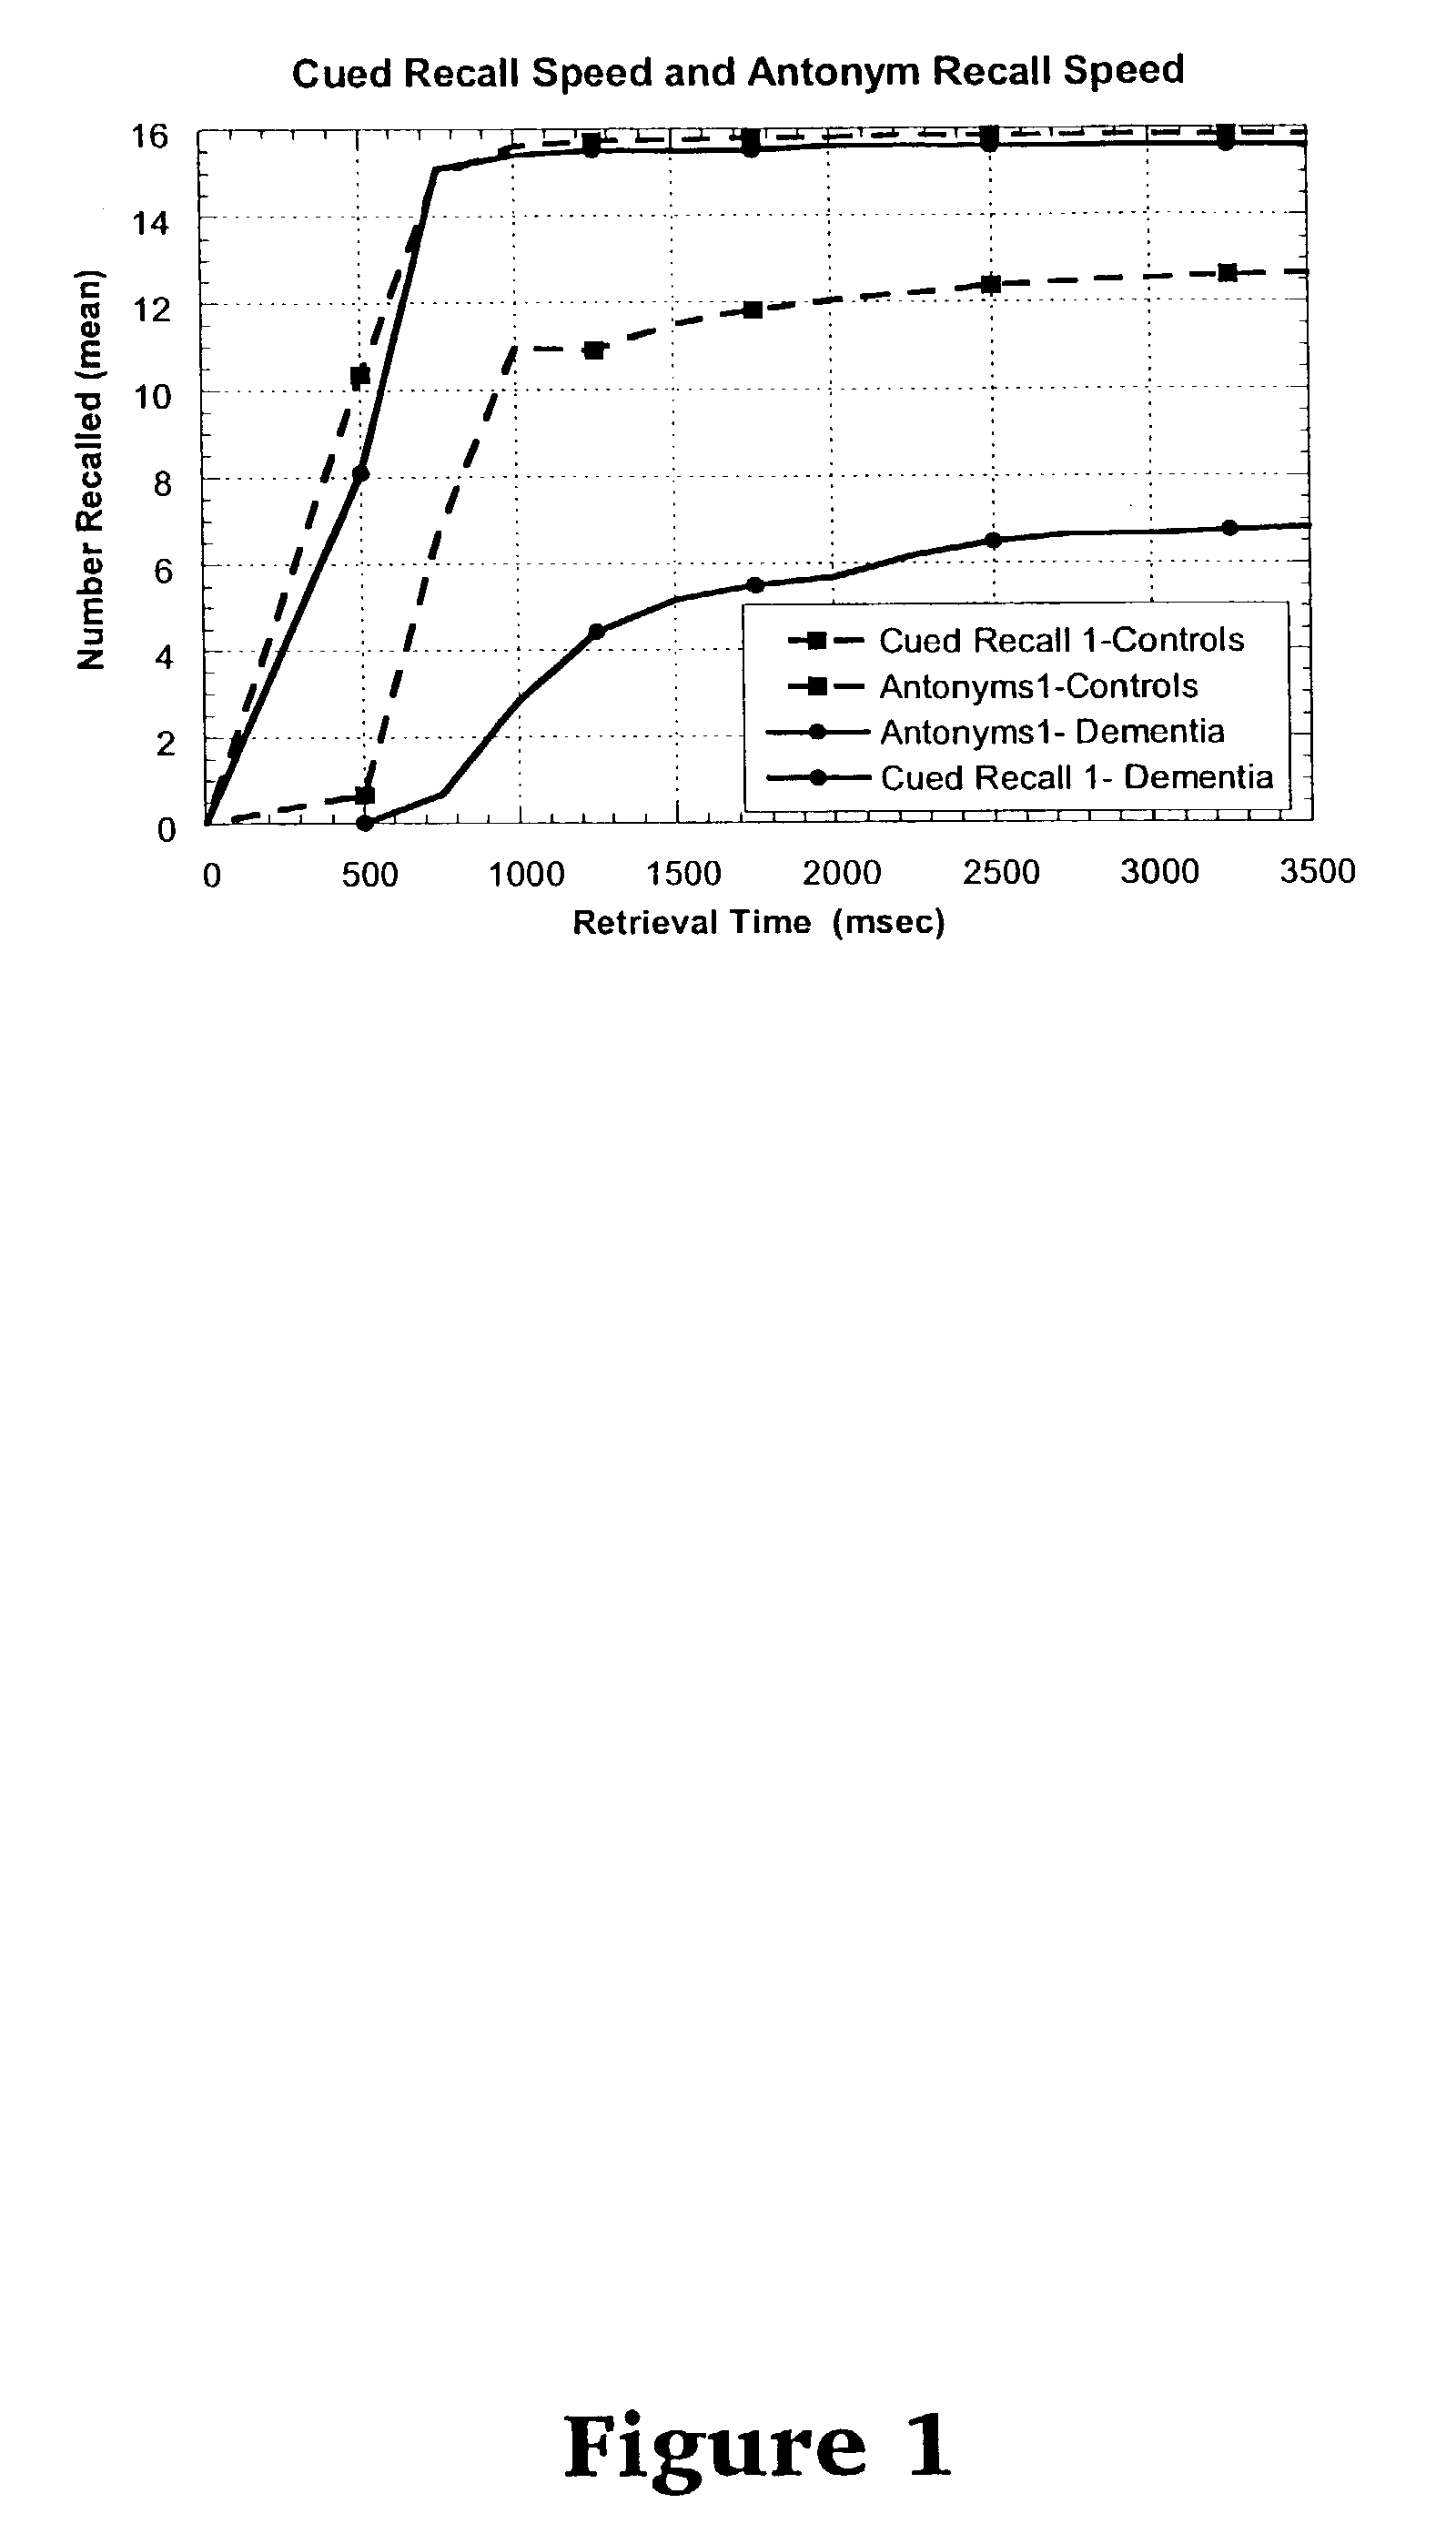 Memory assessment by retrieval speed and uses thereof